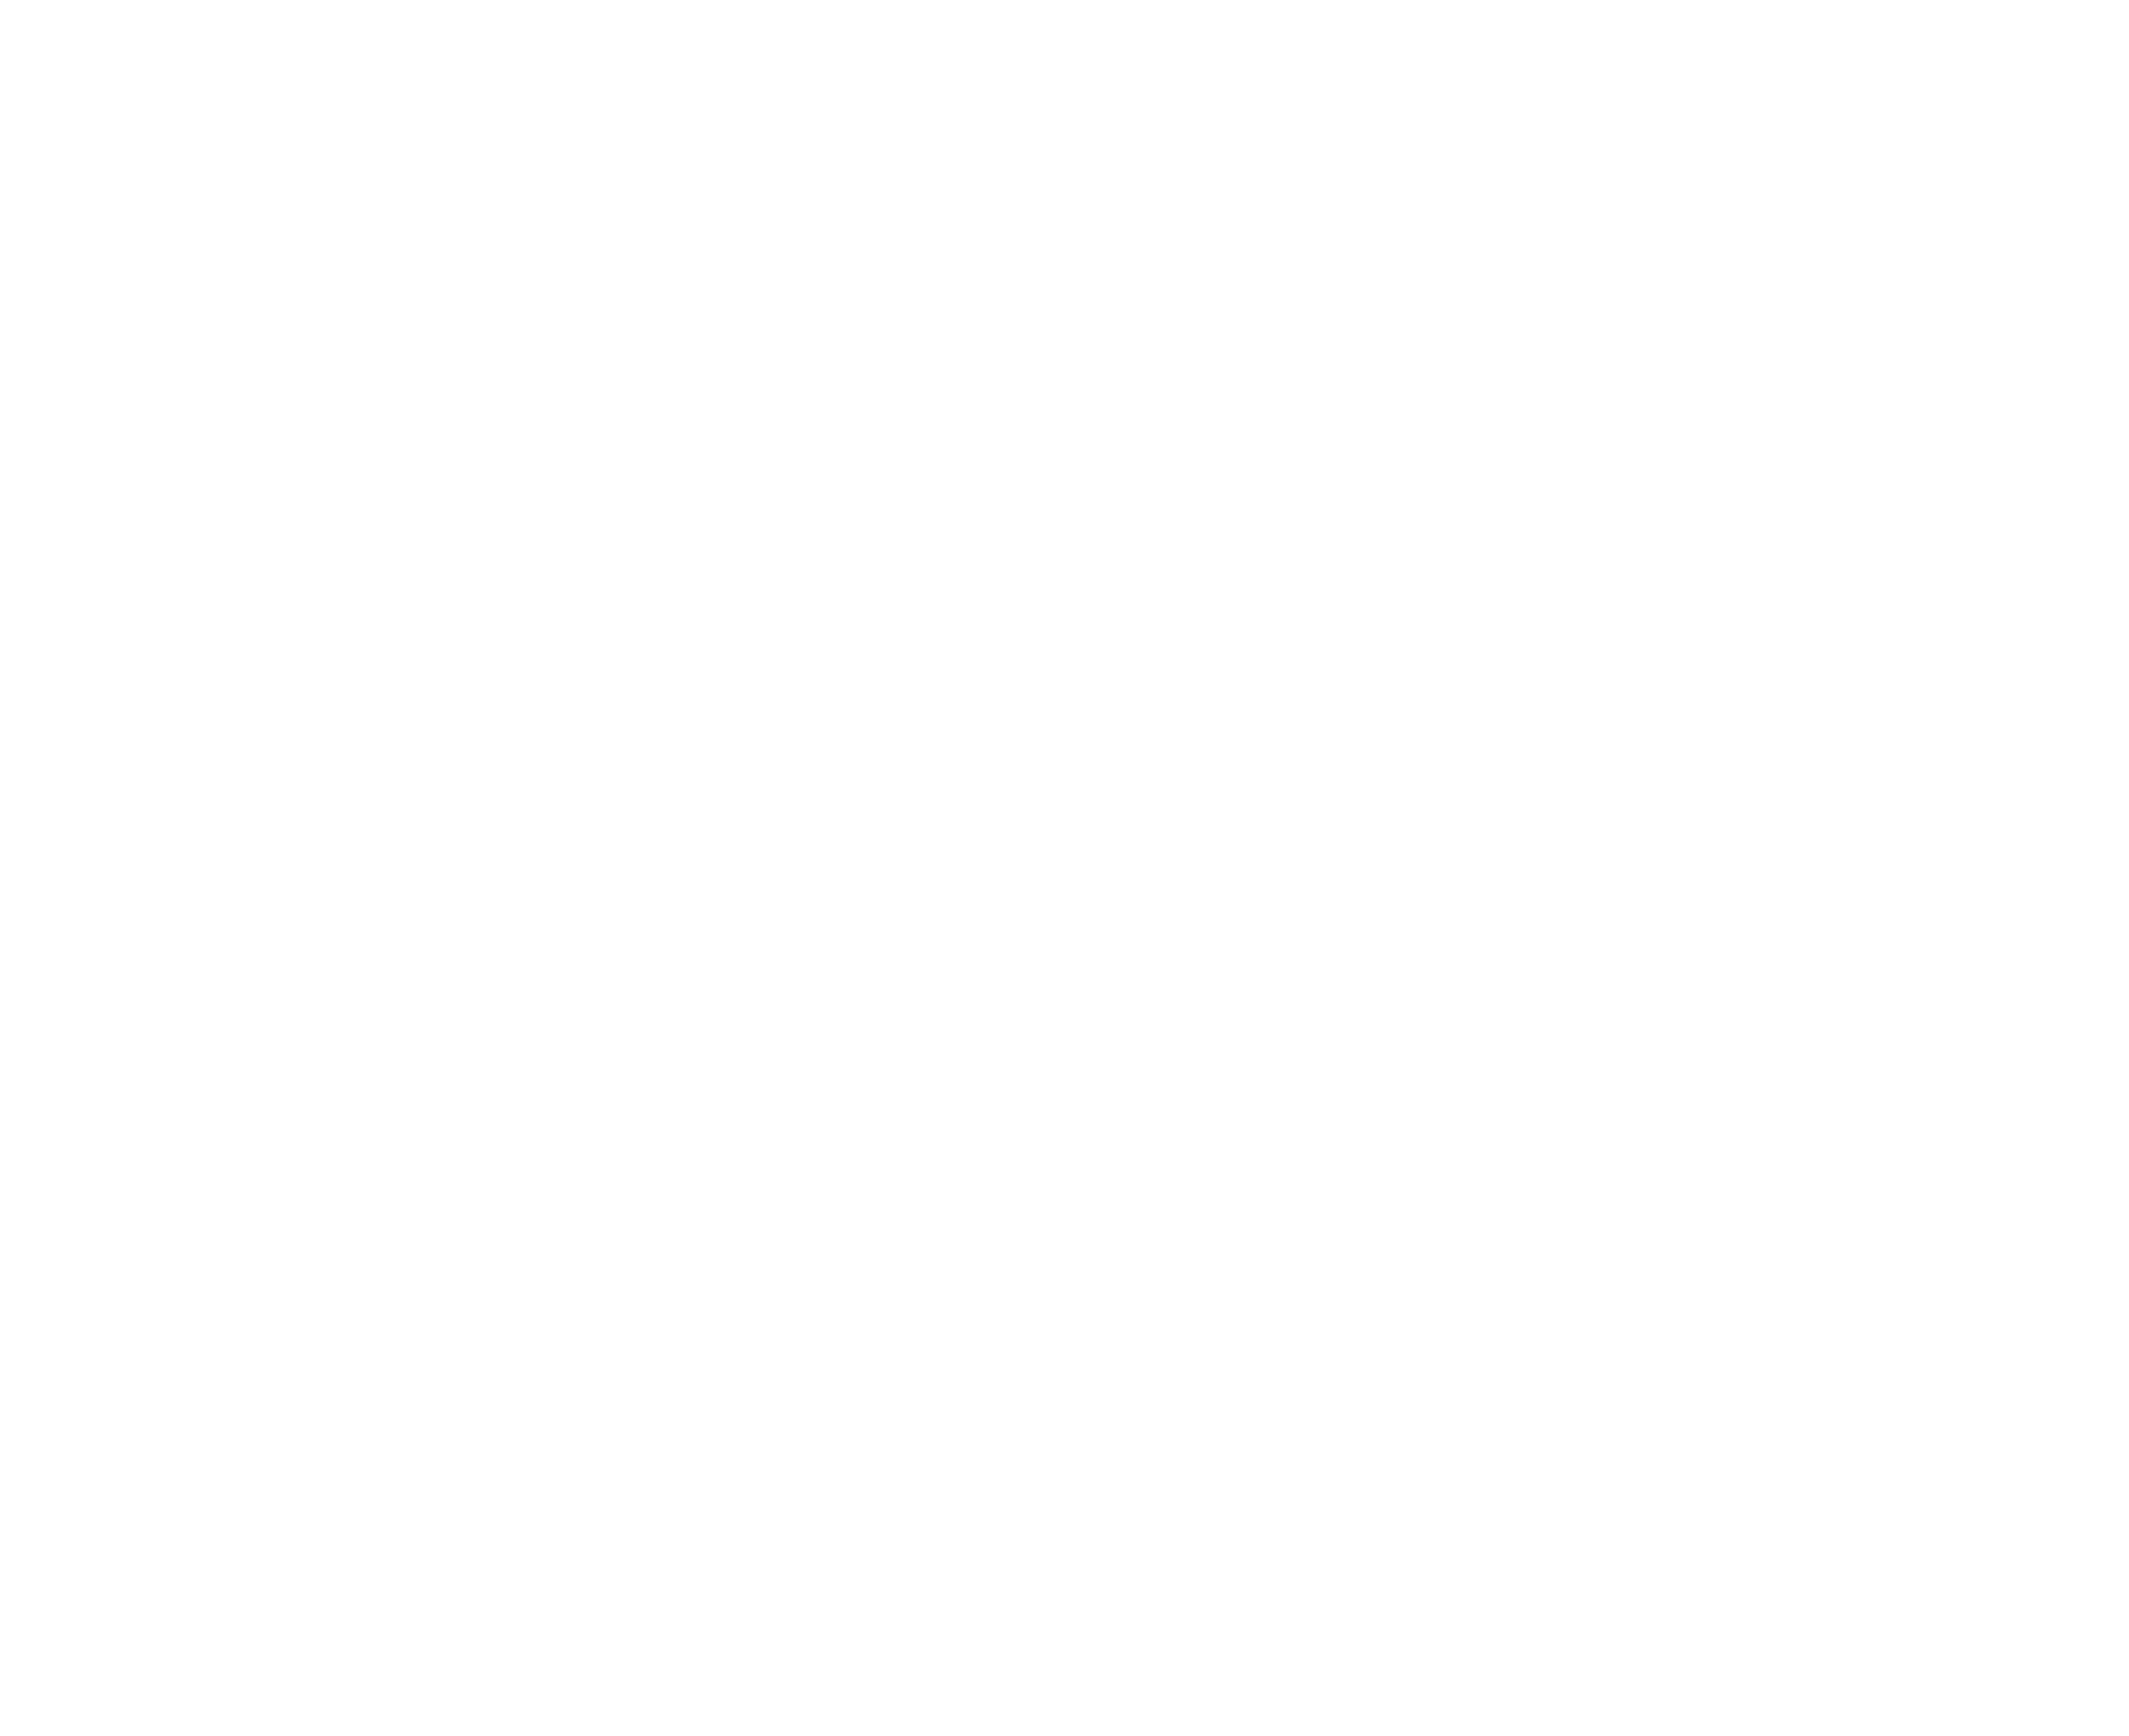 SWBIBLE Global Outreach